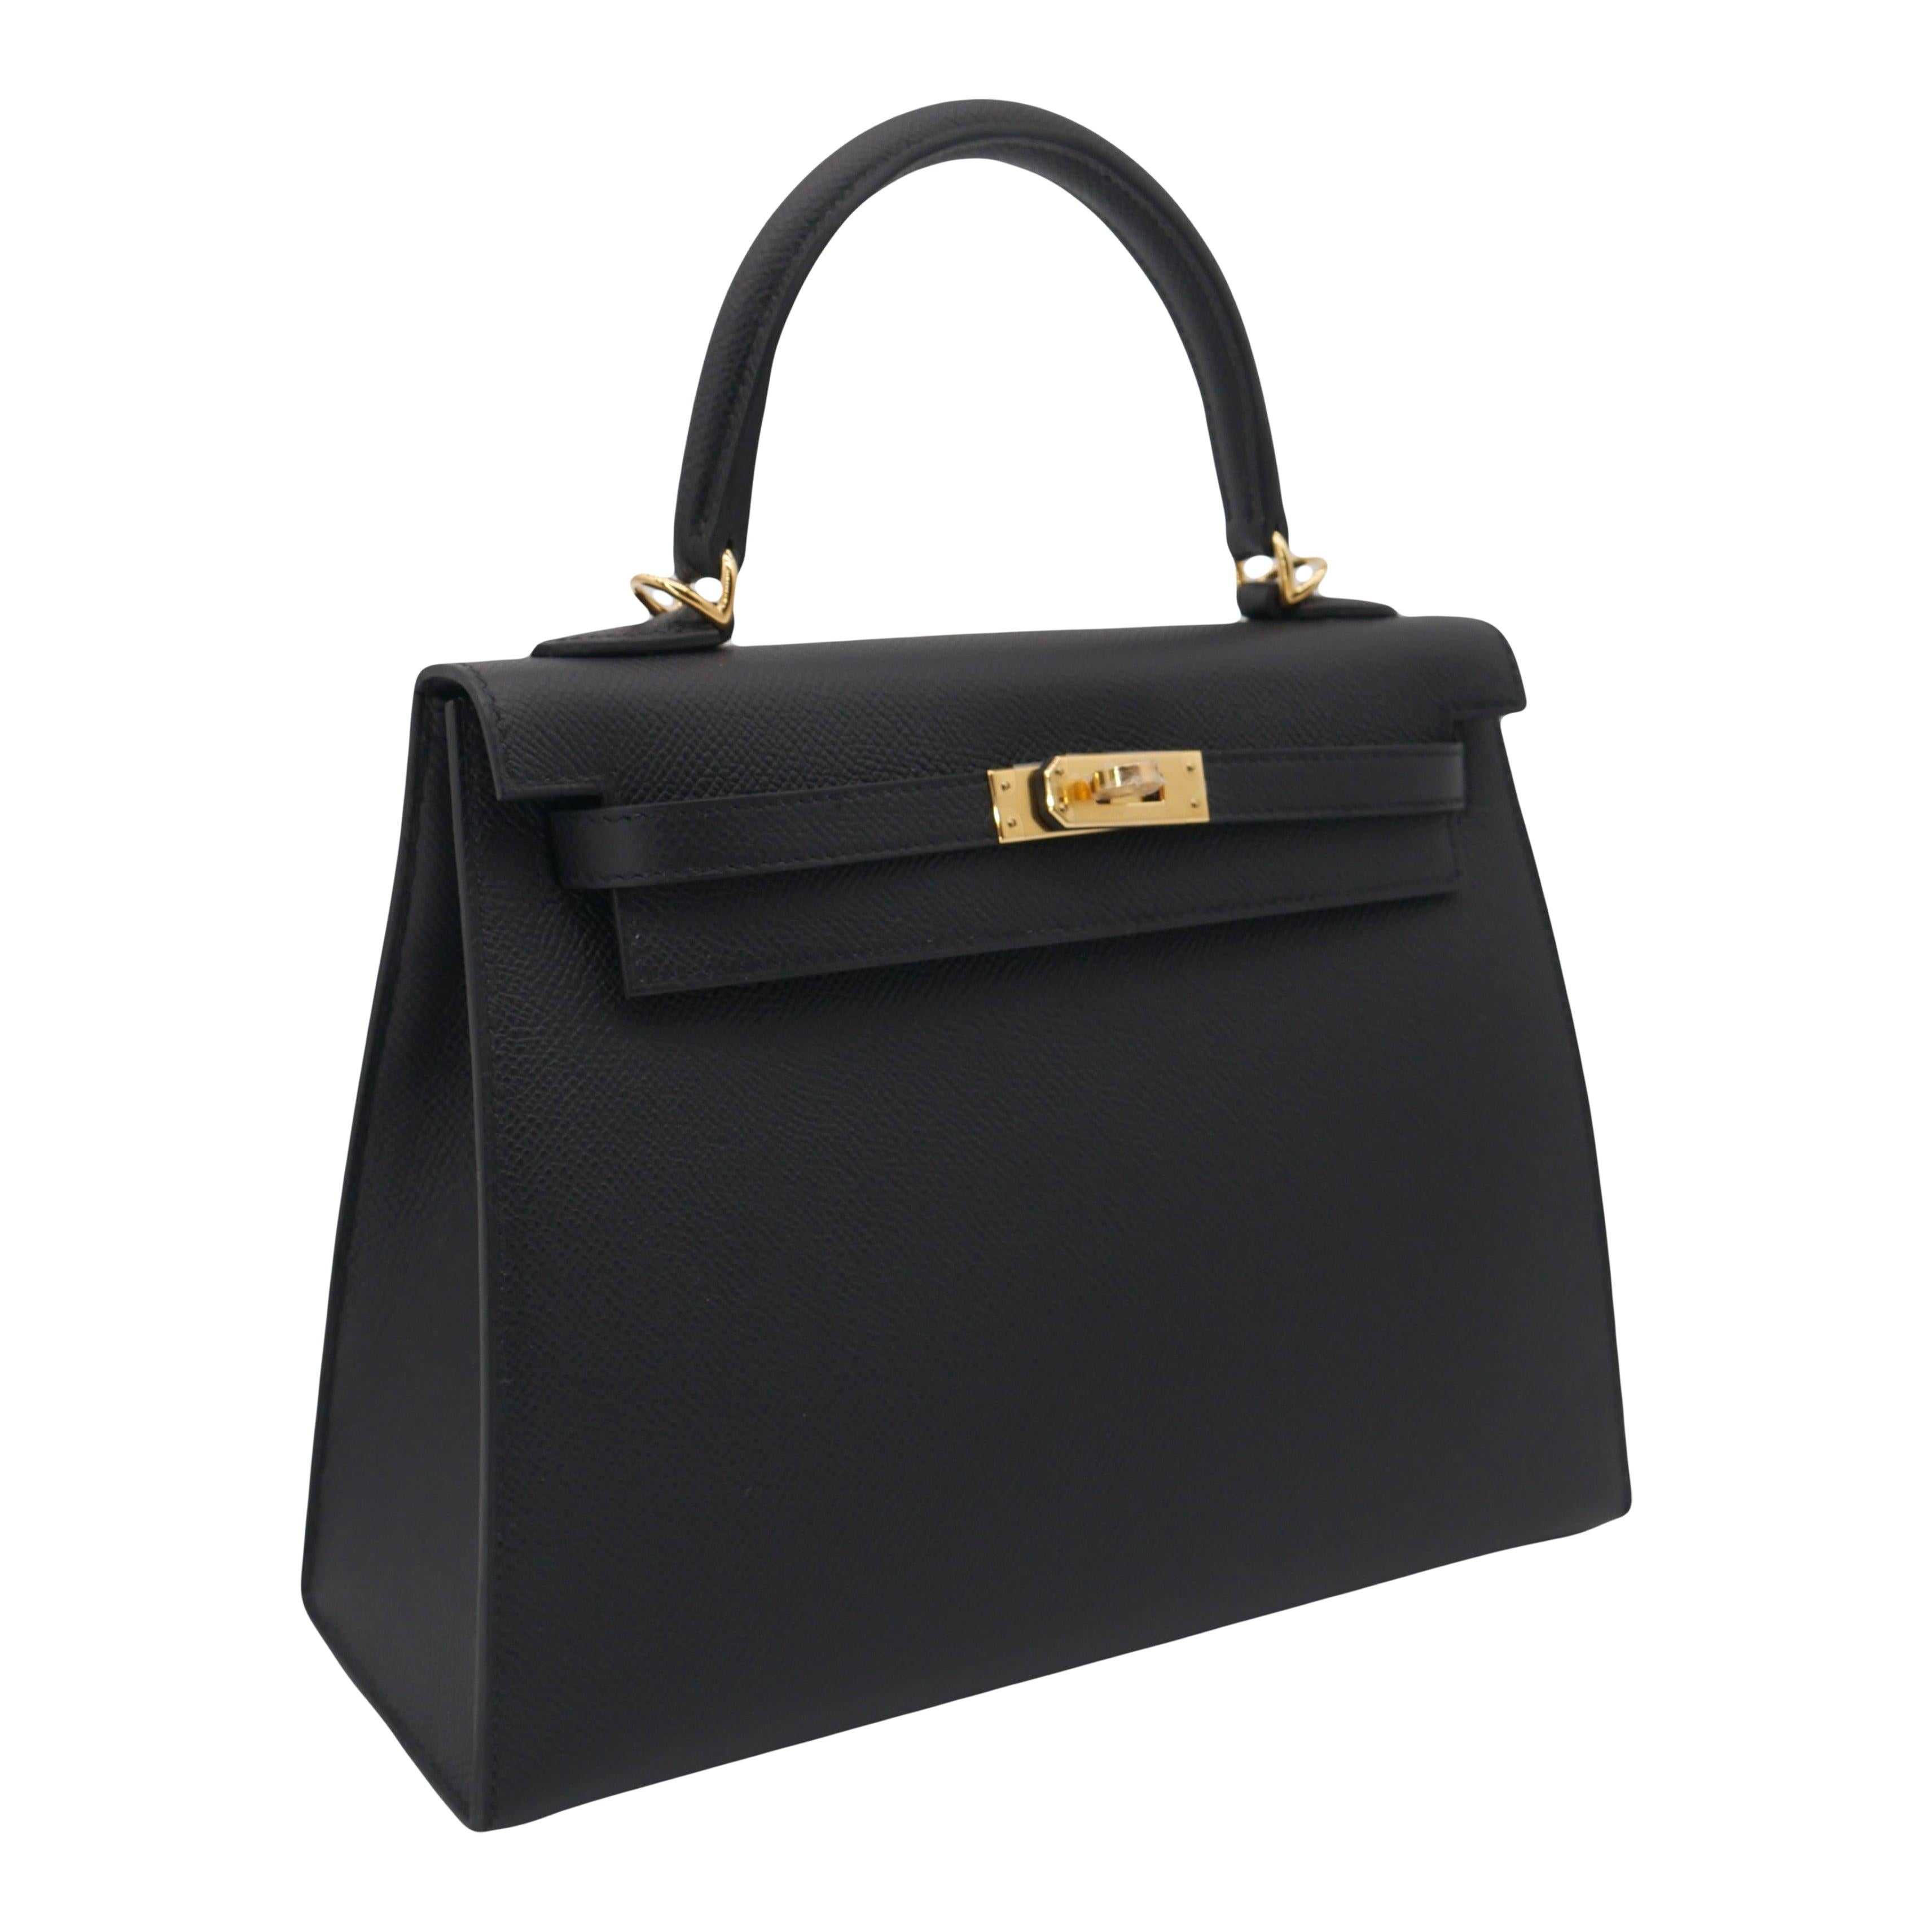 Brand: Hermès
Style: Kelly Sellier
Size: 25cm
Color: Black
Material: Epsom Leather
Hardware: Gold Hardware(GHW)
Dimensions: 9.8